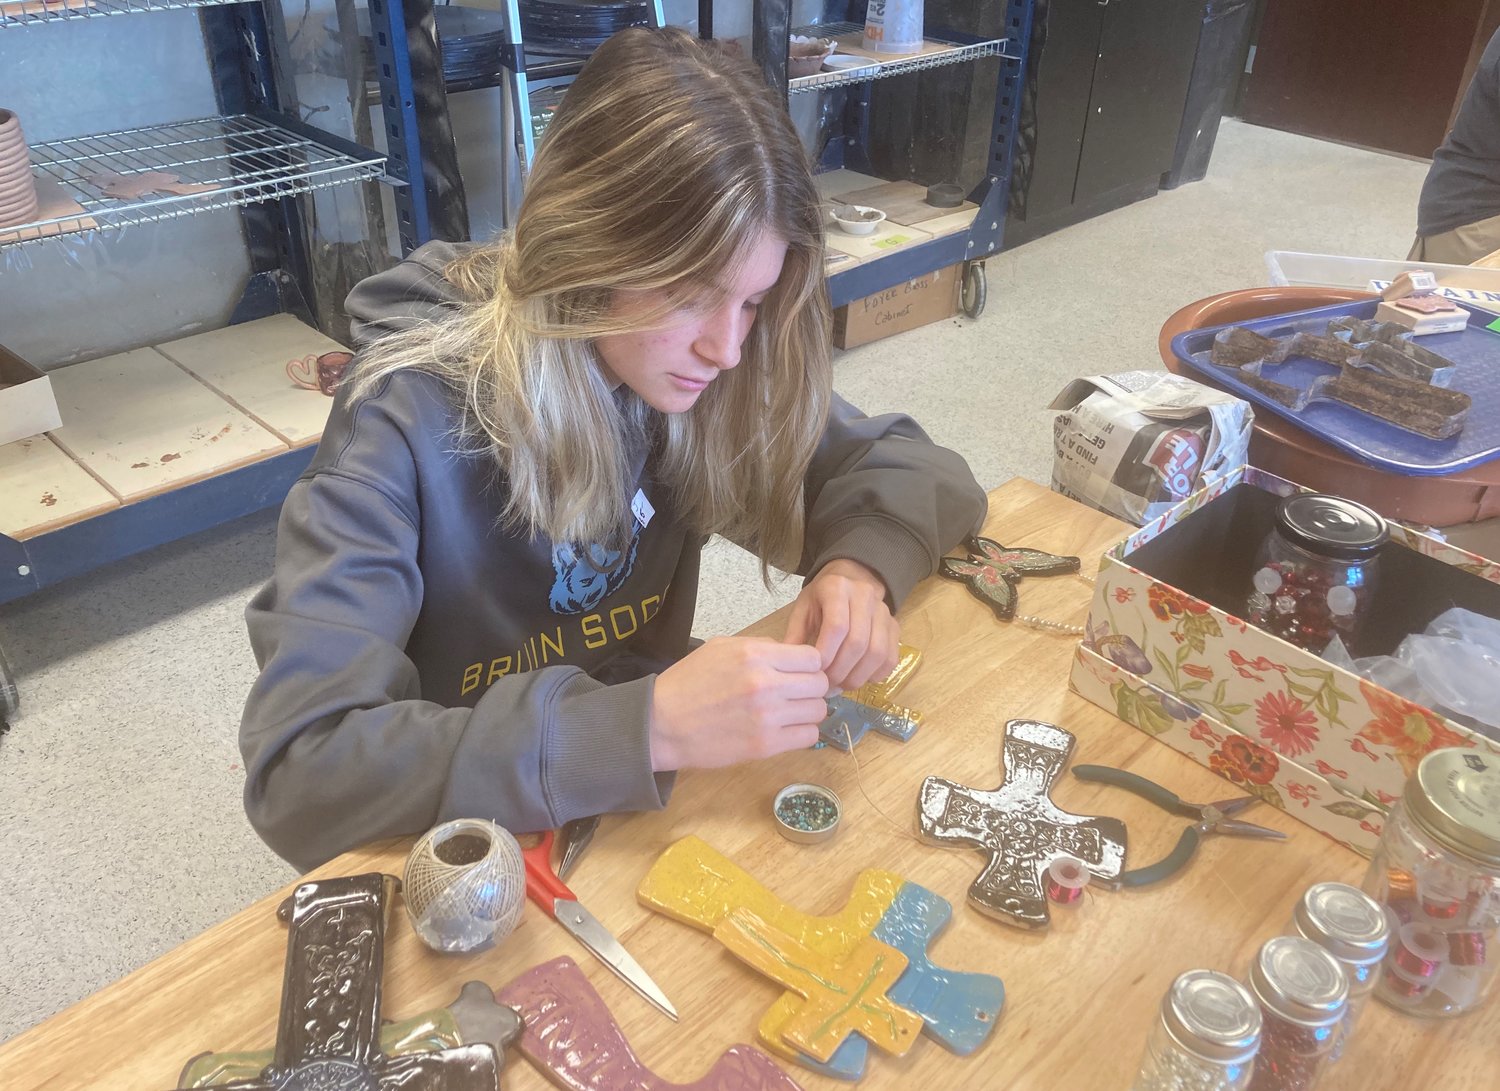 St. Joseph Catholic School art student Truus Alford decorates a student-made ceramic cross to honor Ukraine in the wake of Russia’s invasion of the Eastern European country. The crosses are selling for $5 for small ones and $10 for large ones.